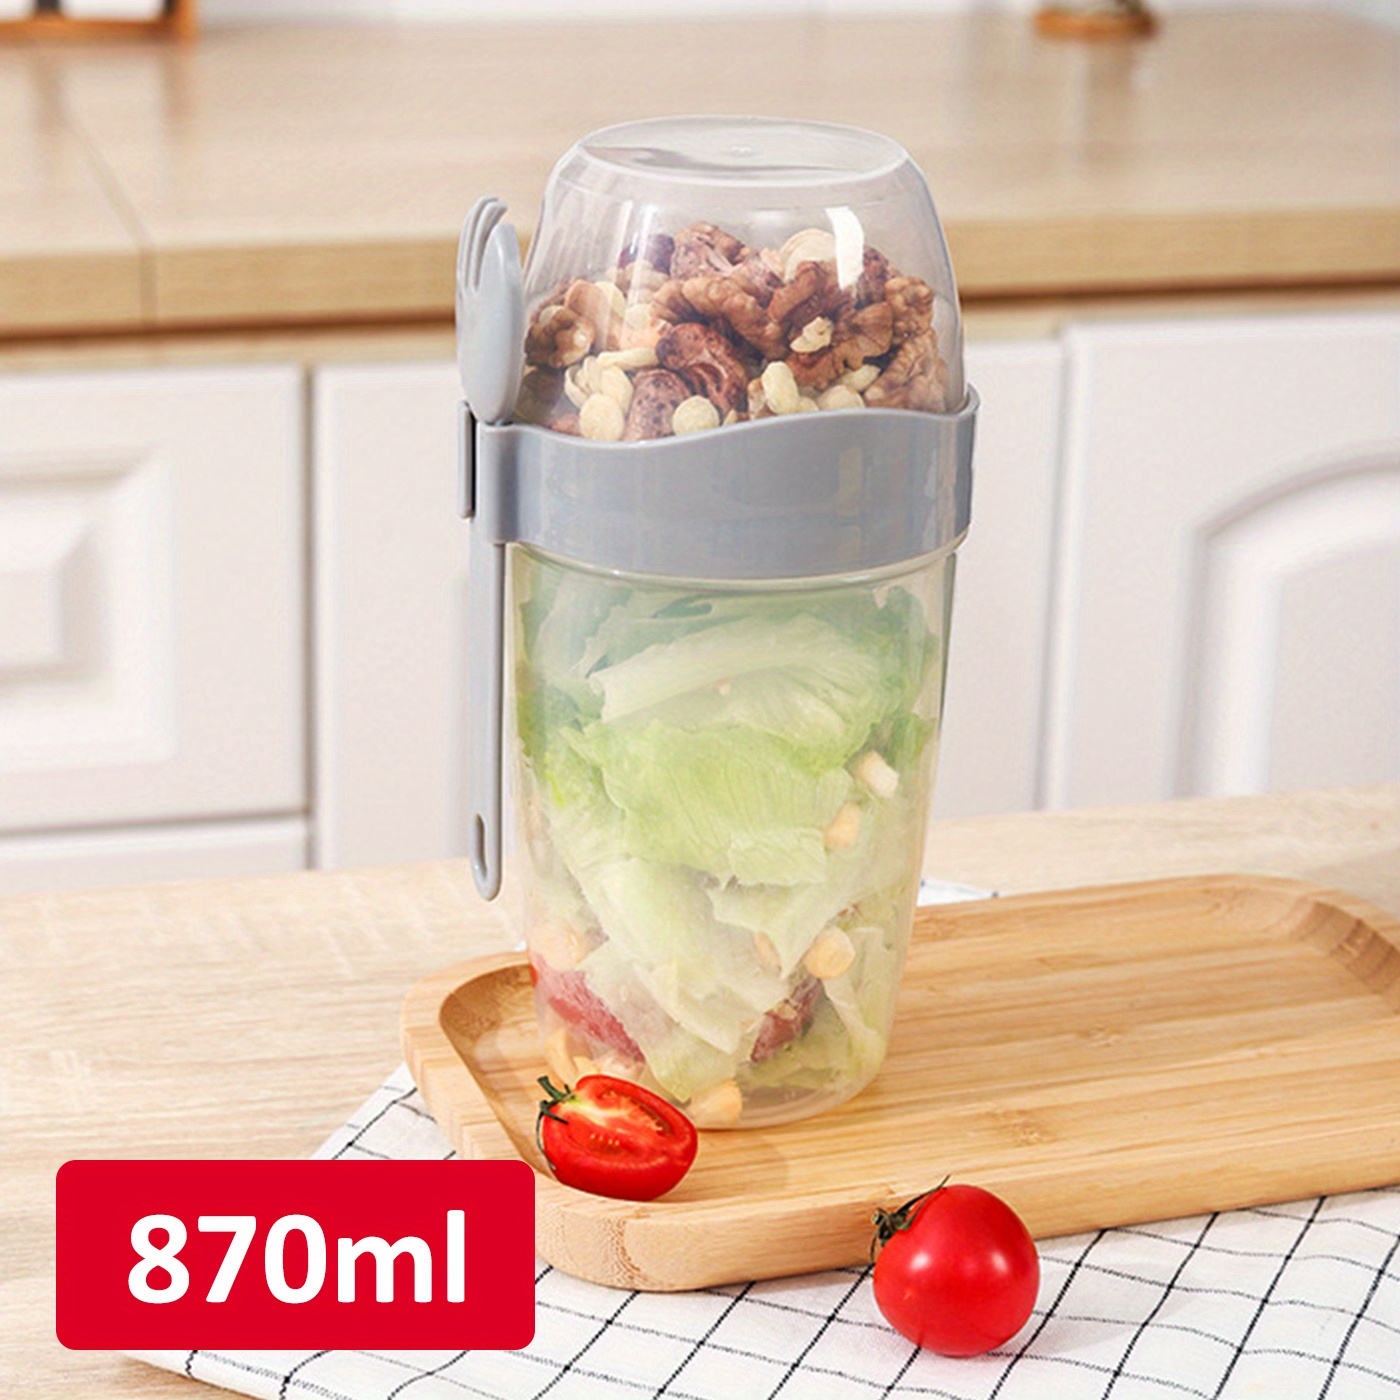  Salad Cup,Salad Dressing Container to Go,Fresh Salad Cup with  Fork and Dressing Holder,Salad Meal Shaker Cup,Reusable Portable Fruit and  Vegetable Salad Cups,Suitable for Breakfast Lunch Dinner : Home & Kitchen